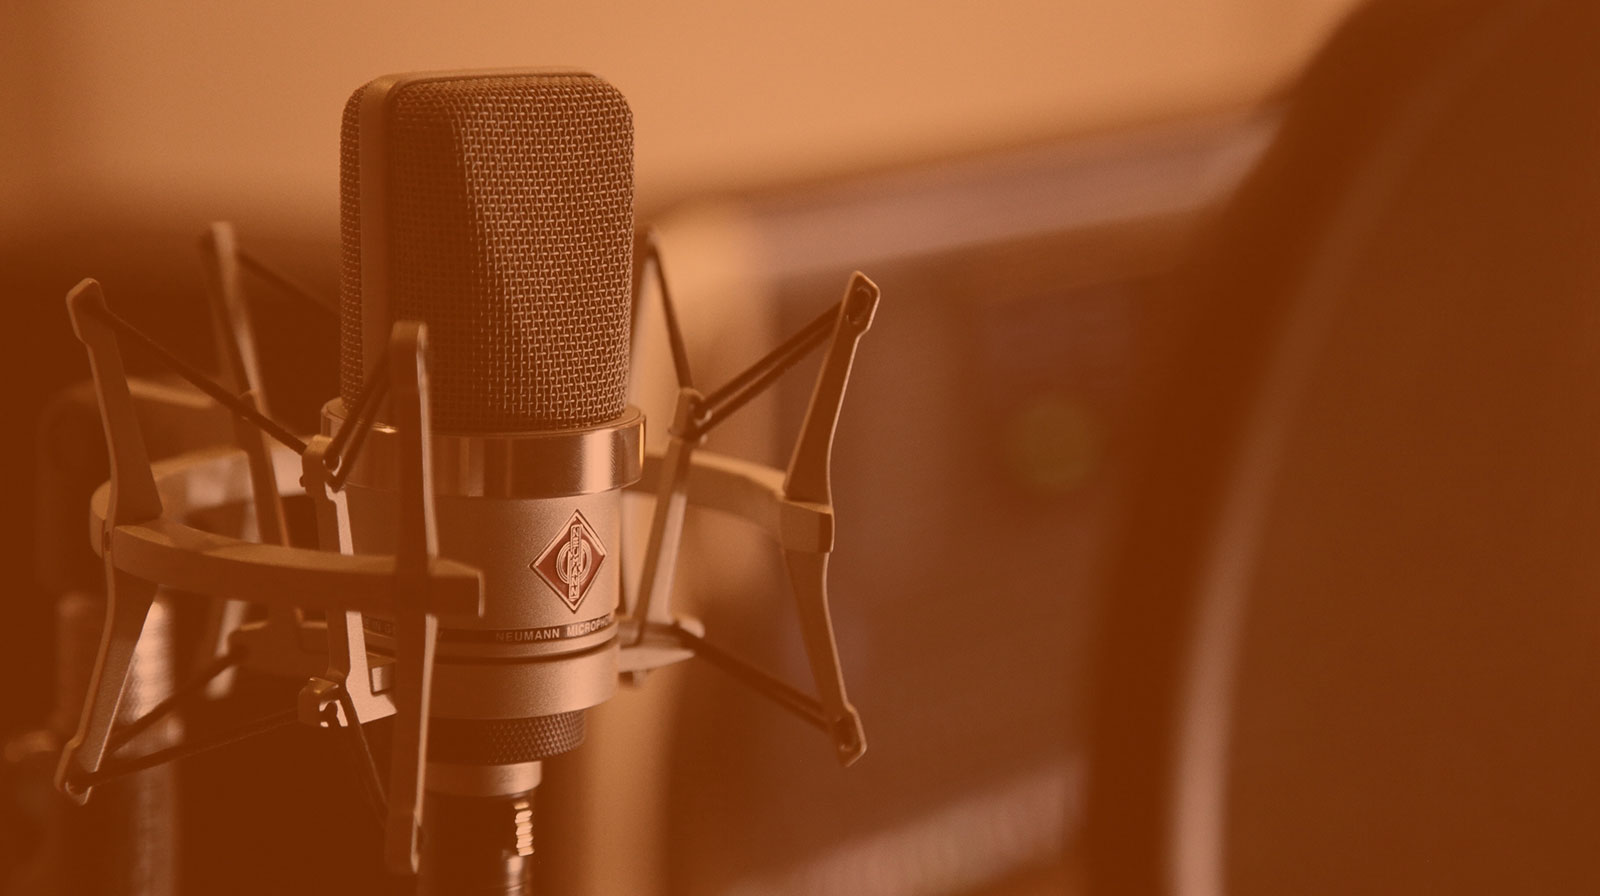 The essentials for recording screencasts and podcasts